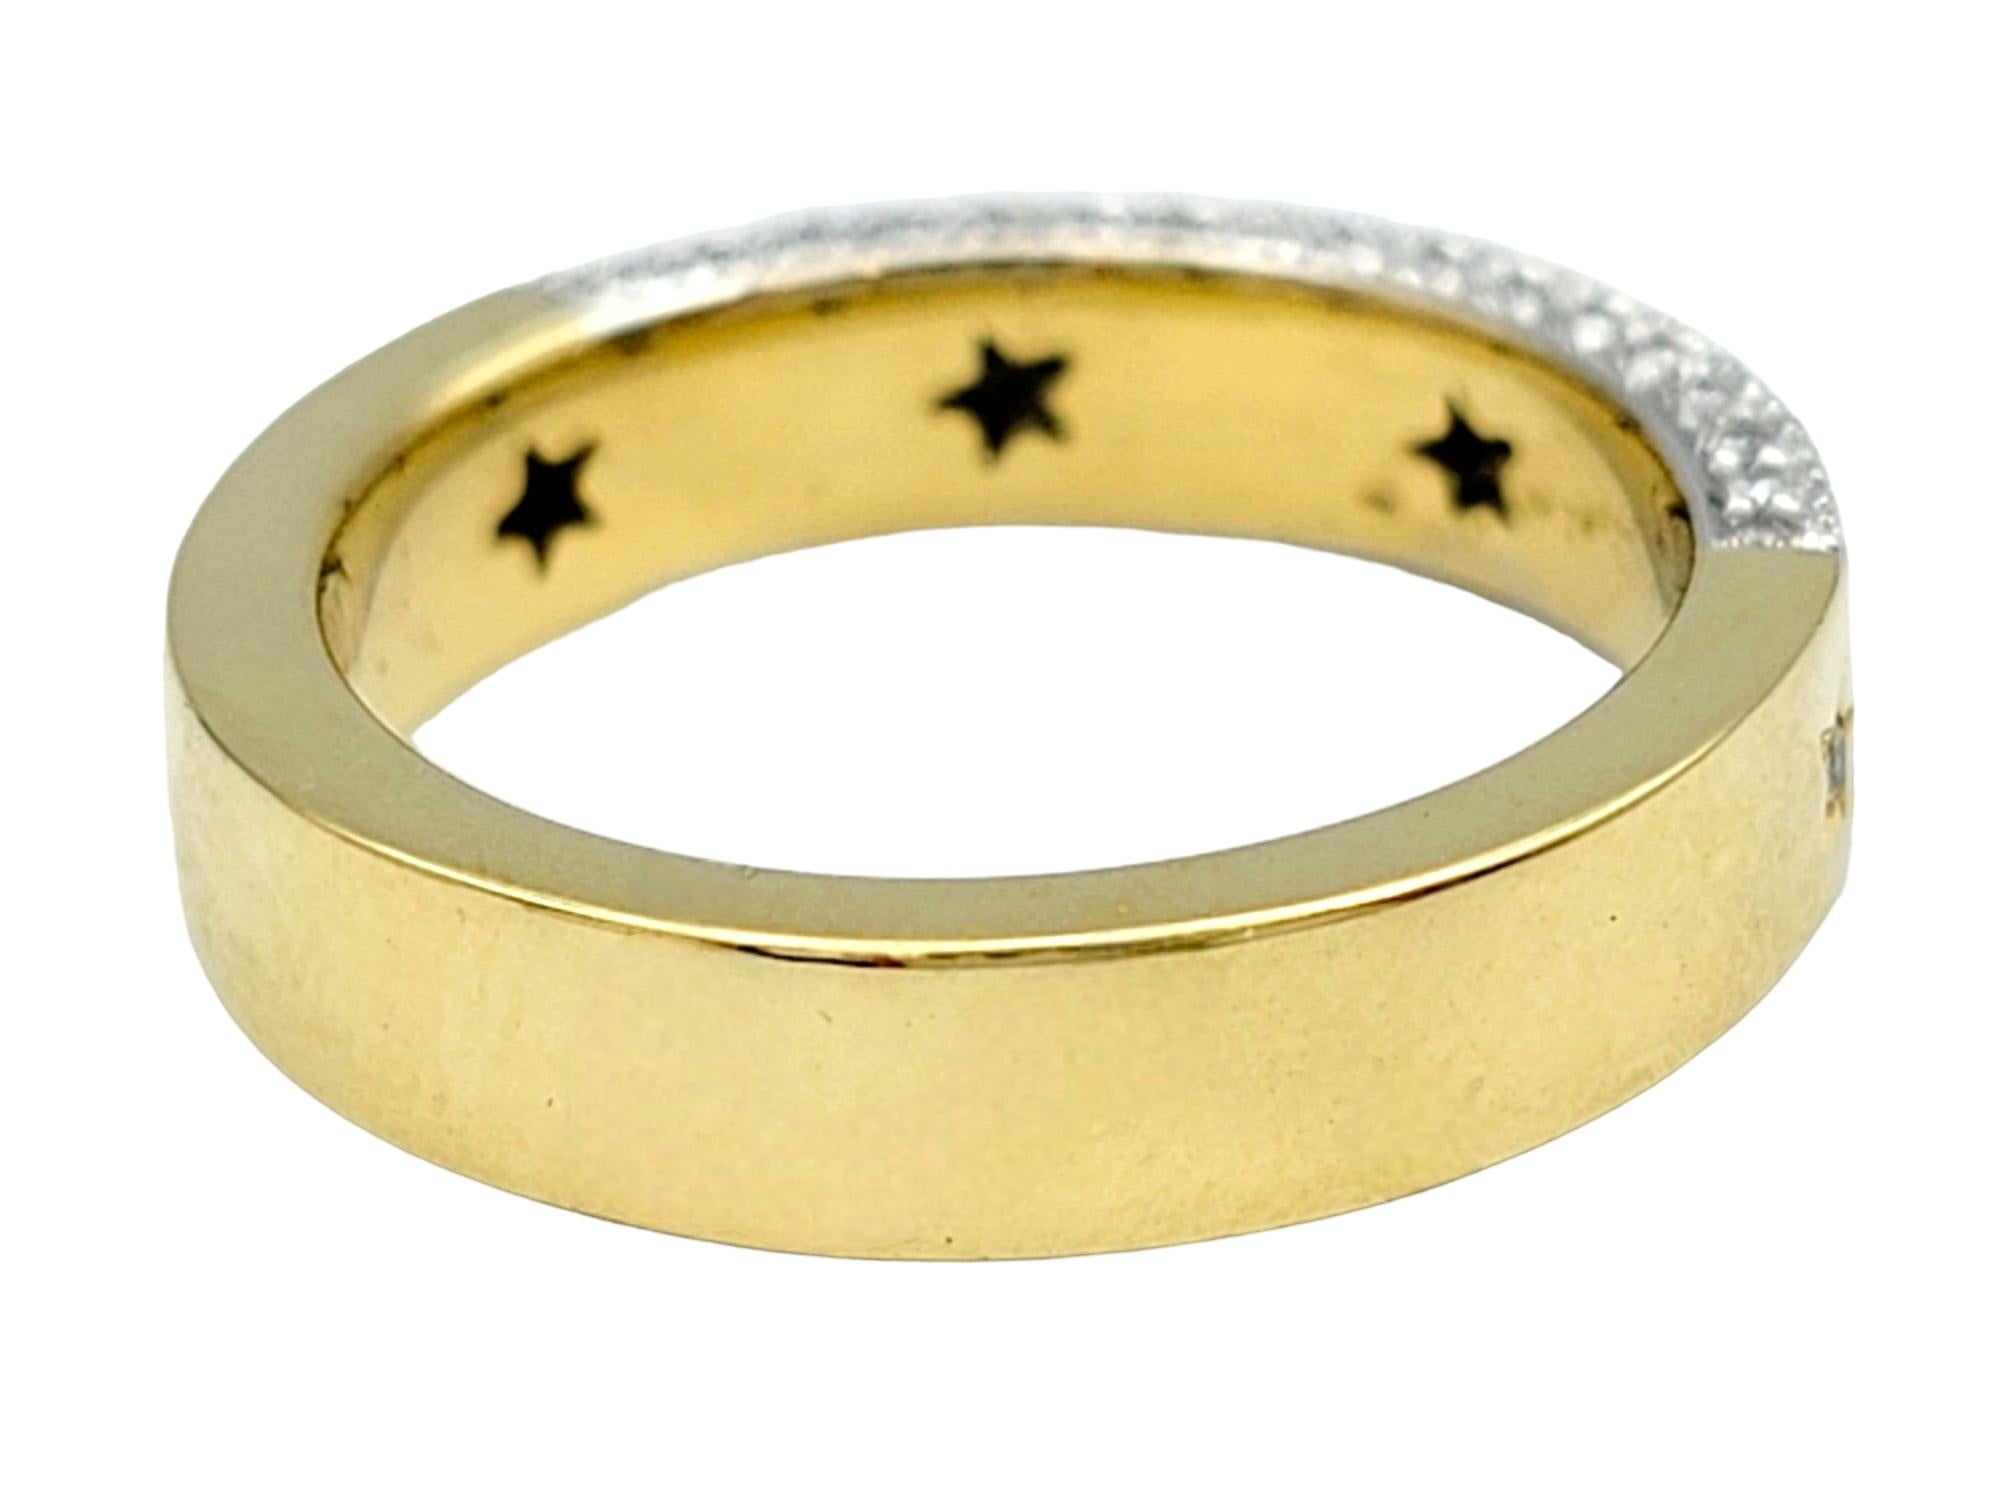 H. Stern Triple Row Diamond Band Ring with Star Designs in 18 Karat Yellow Gold For Sale 2